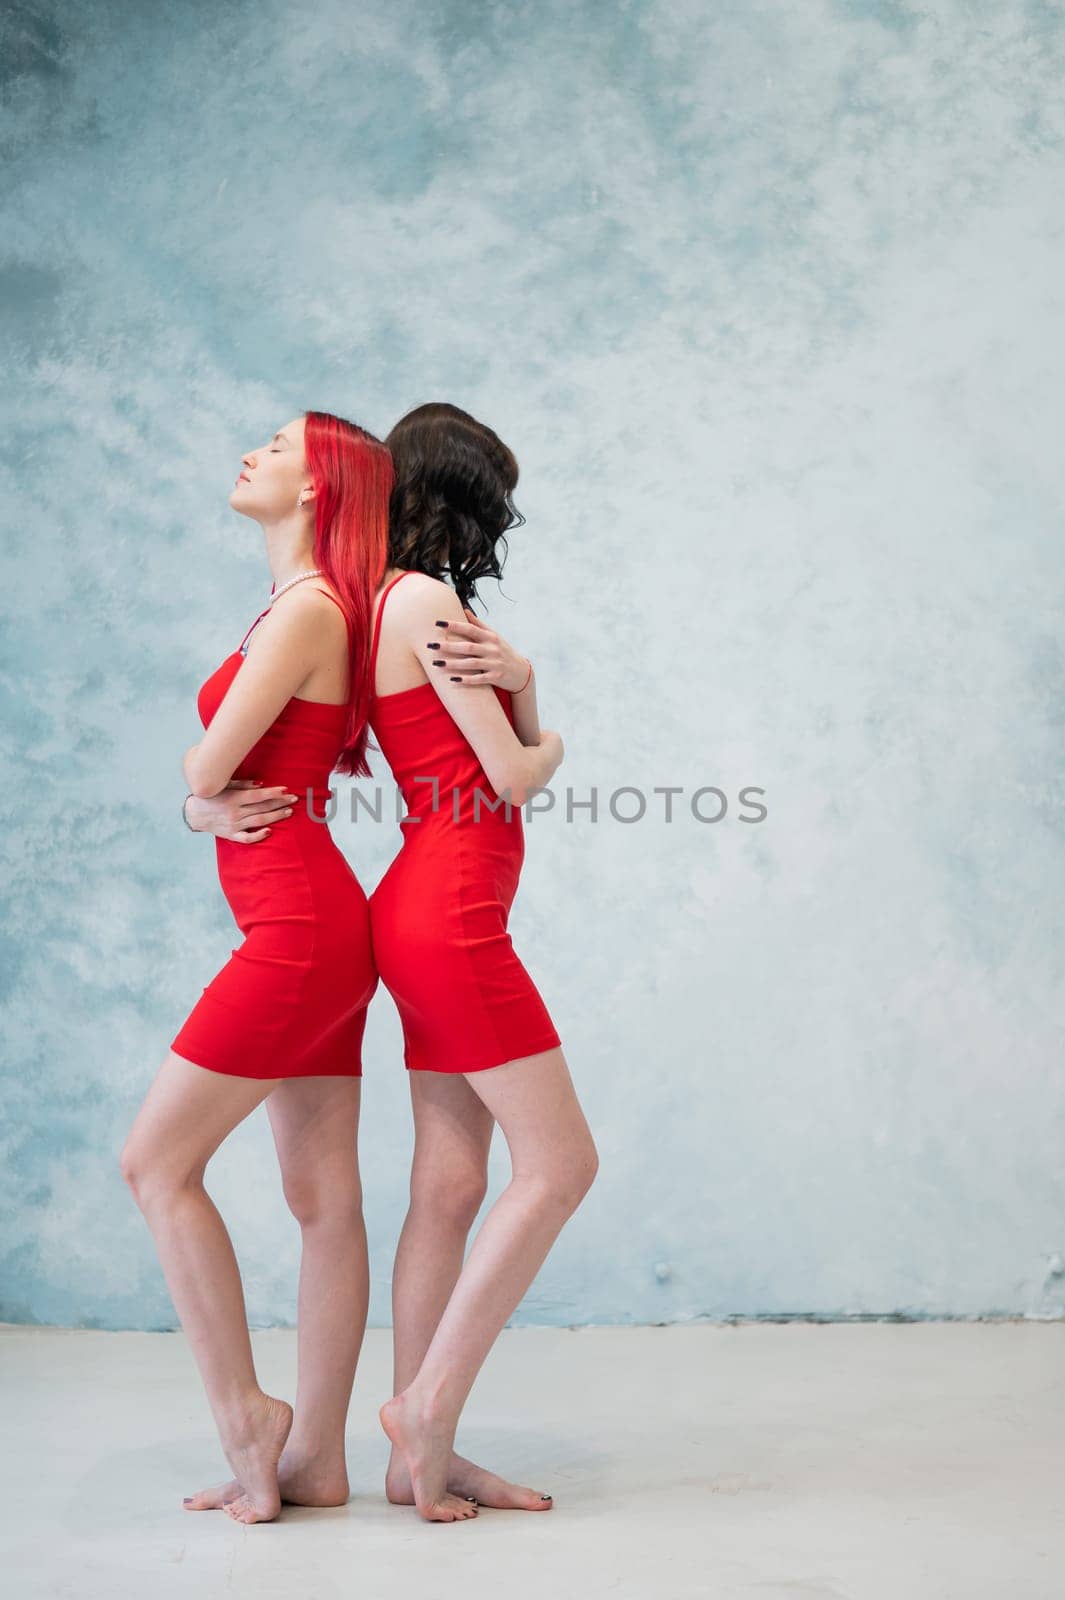 A full-length portrait of two women dressed in identical red dresses and standing back to back. Lesbian intimacy